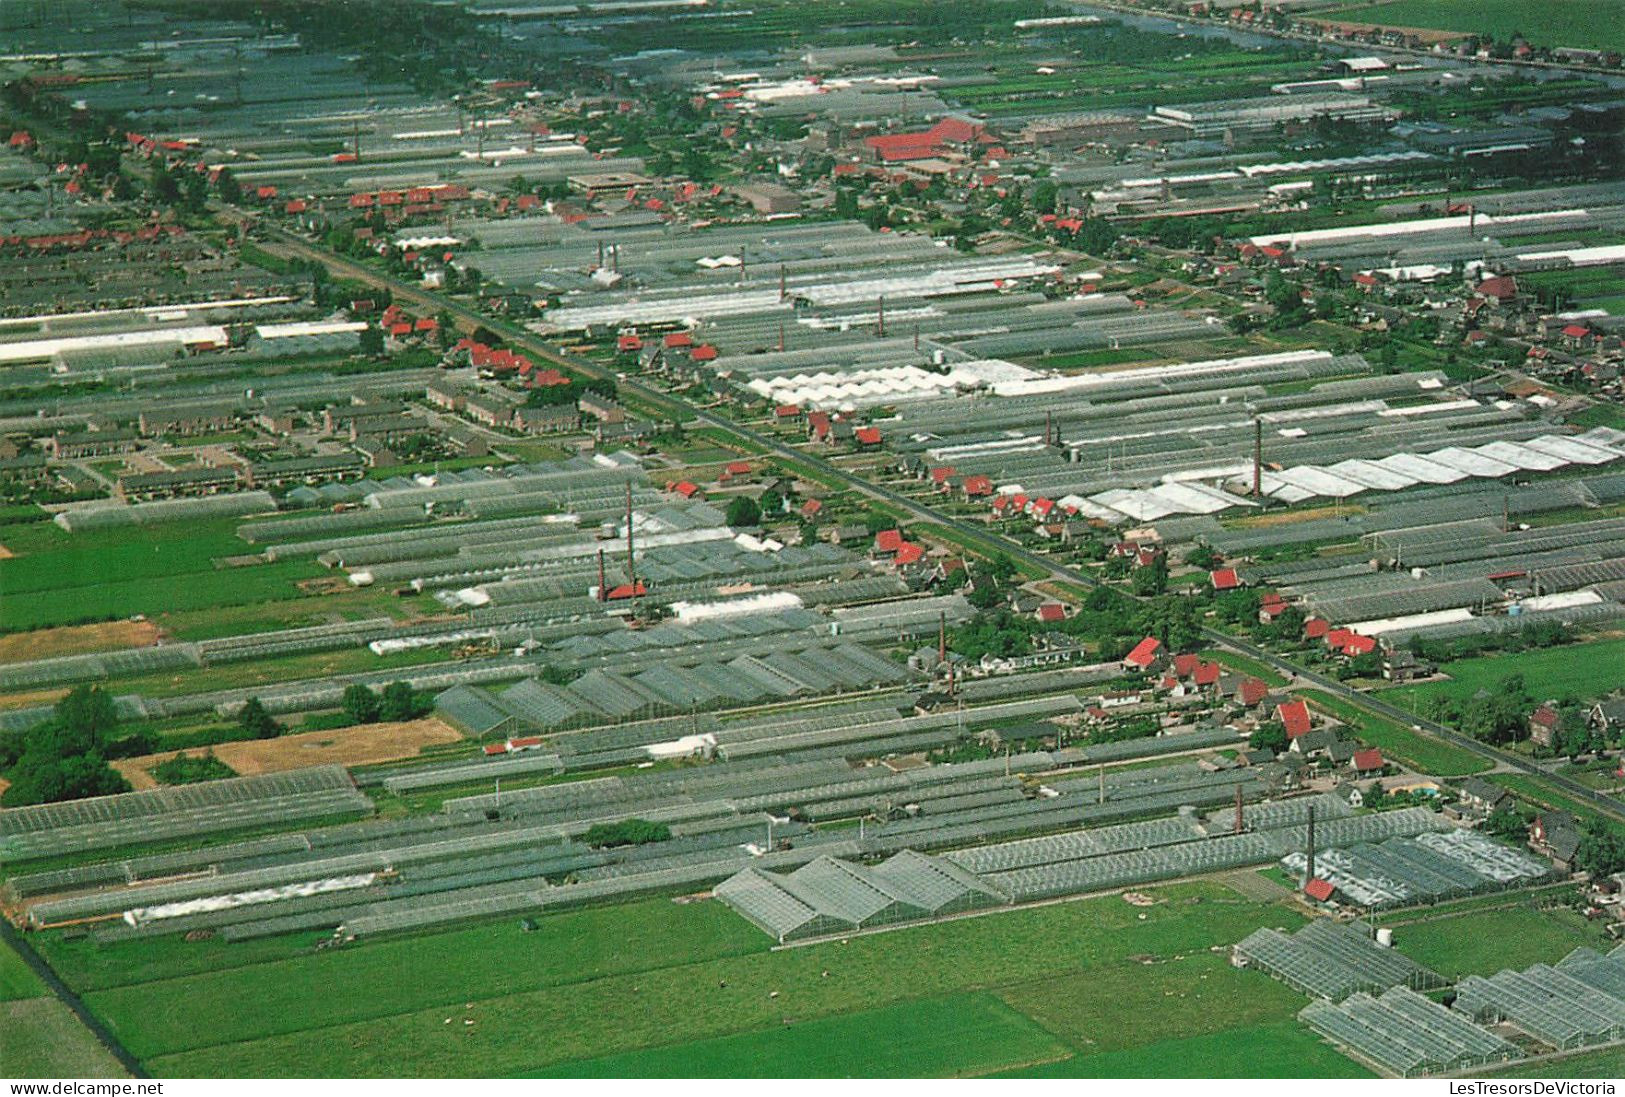 PAYS-BAS - Aalsmeer / Holland - Aalsmeer With The Largest Flower Auction In The World - General View - Carte Postale - Aalsmeer